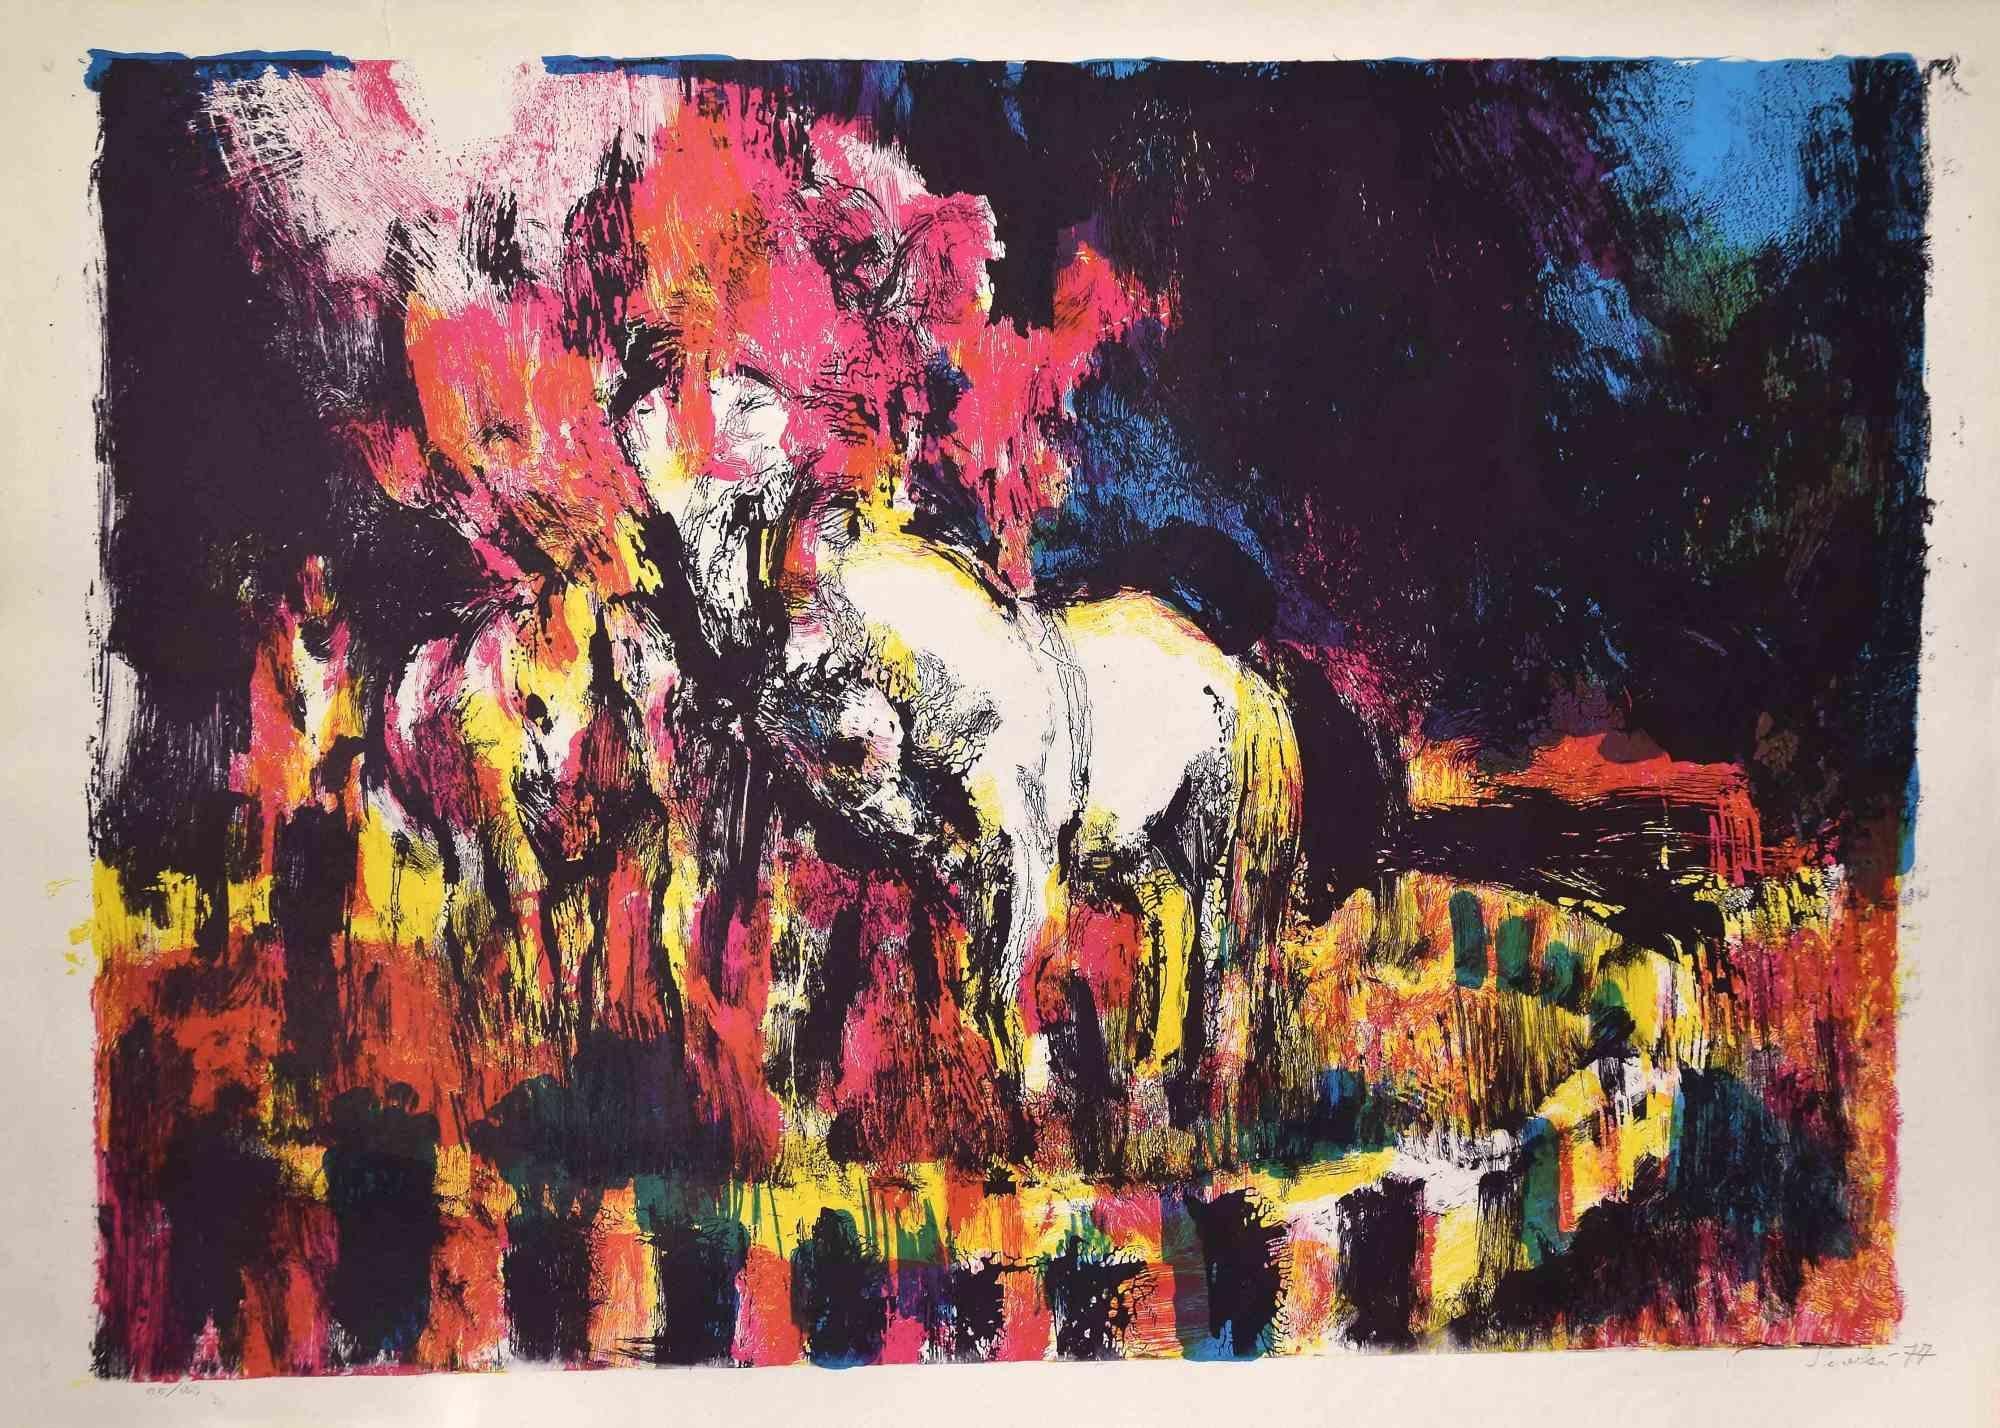 Abstract Composition is a lithograph print on paper realized by Nicola Simbari in 1970 ca.

Hand-signed on the lower right.

Numbered, edition of 100 prints.

In good condition.

The artwork is represented by harmonious colors that create delicacy